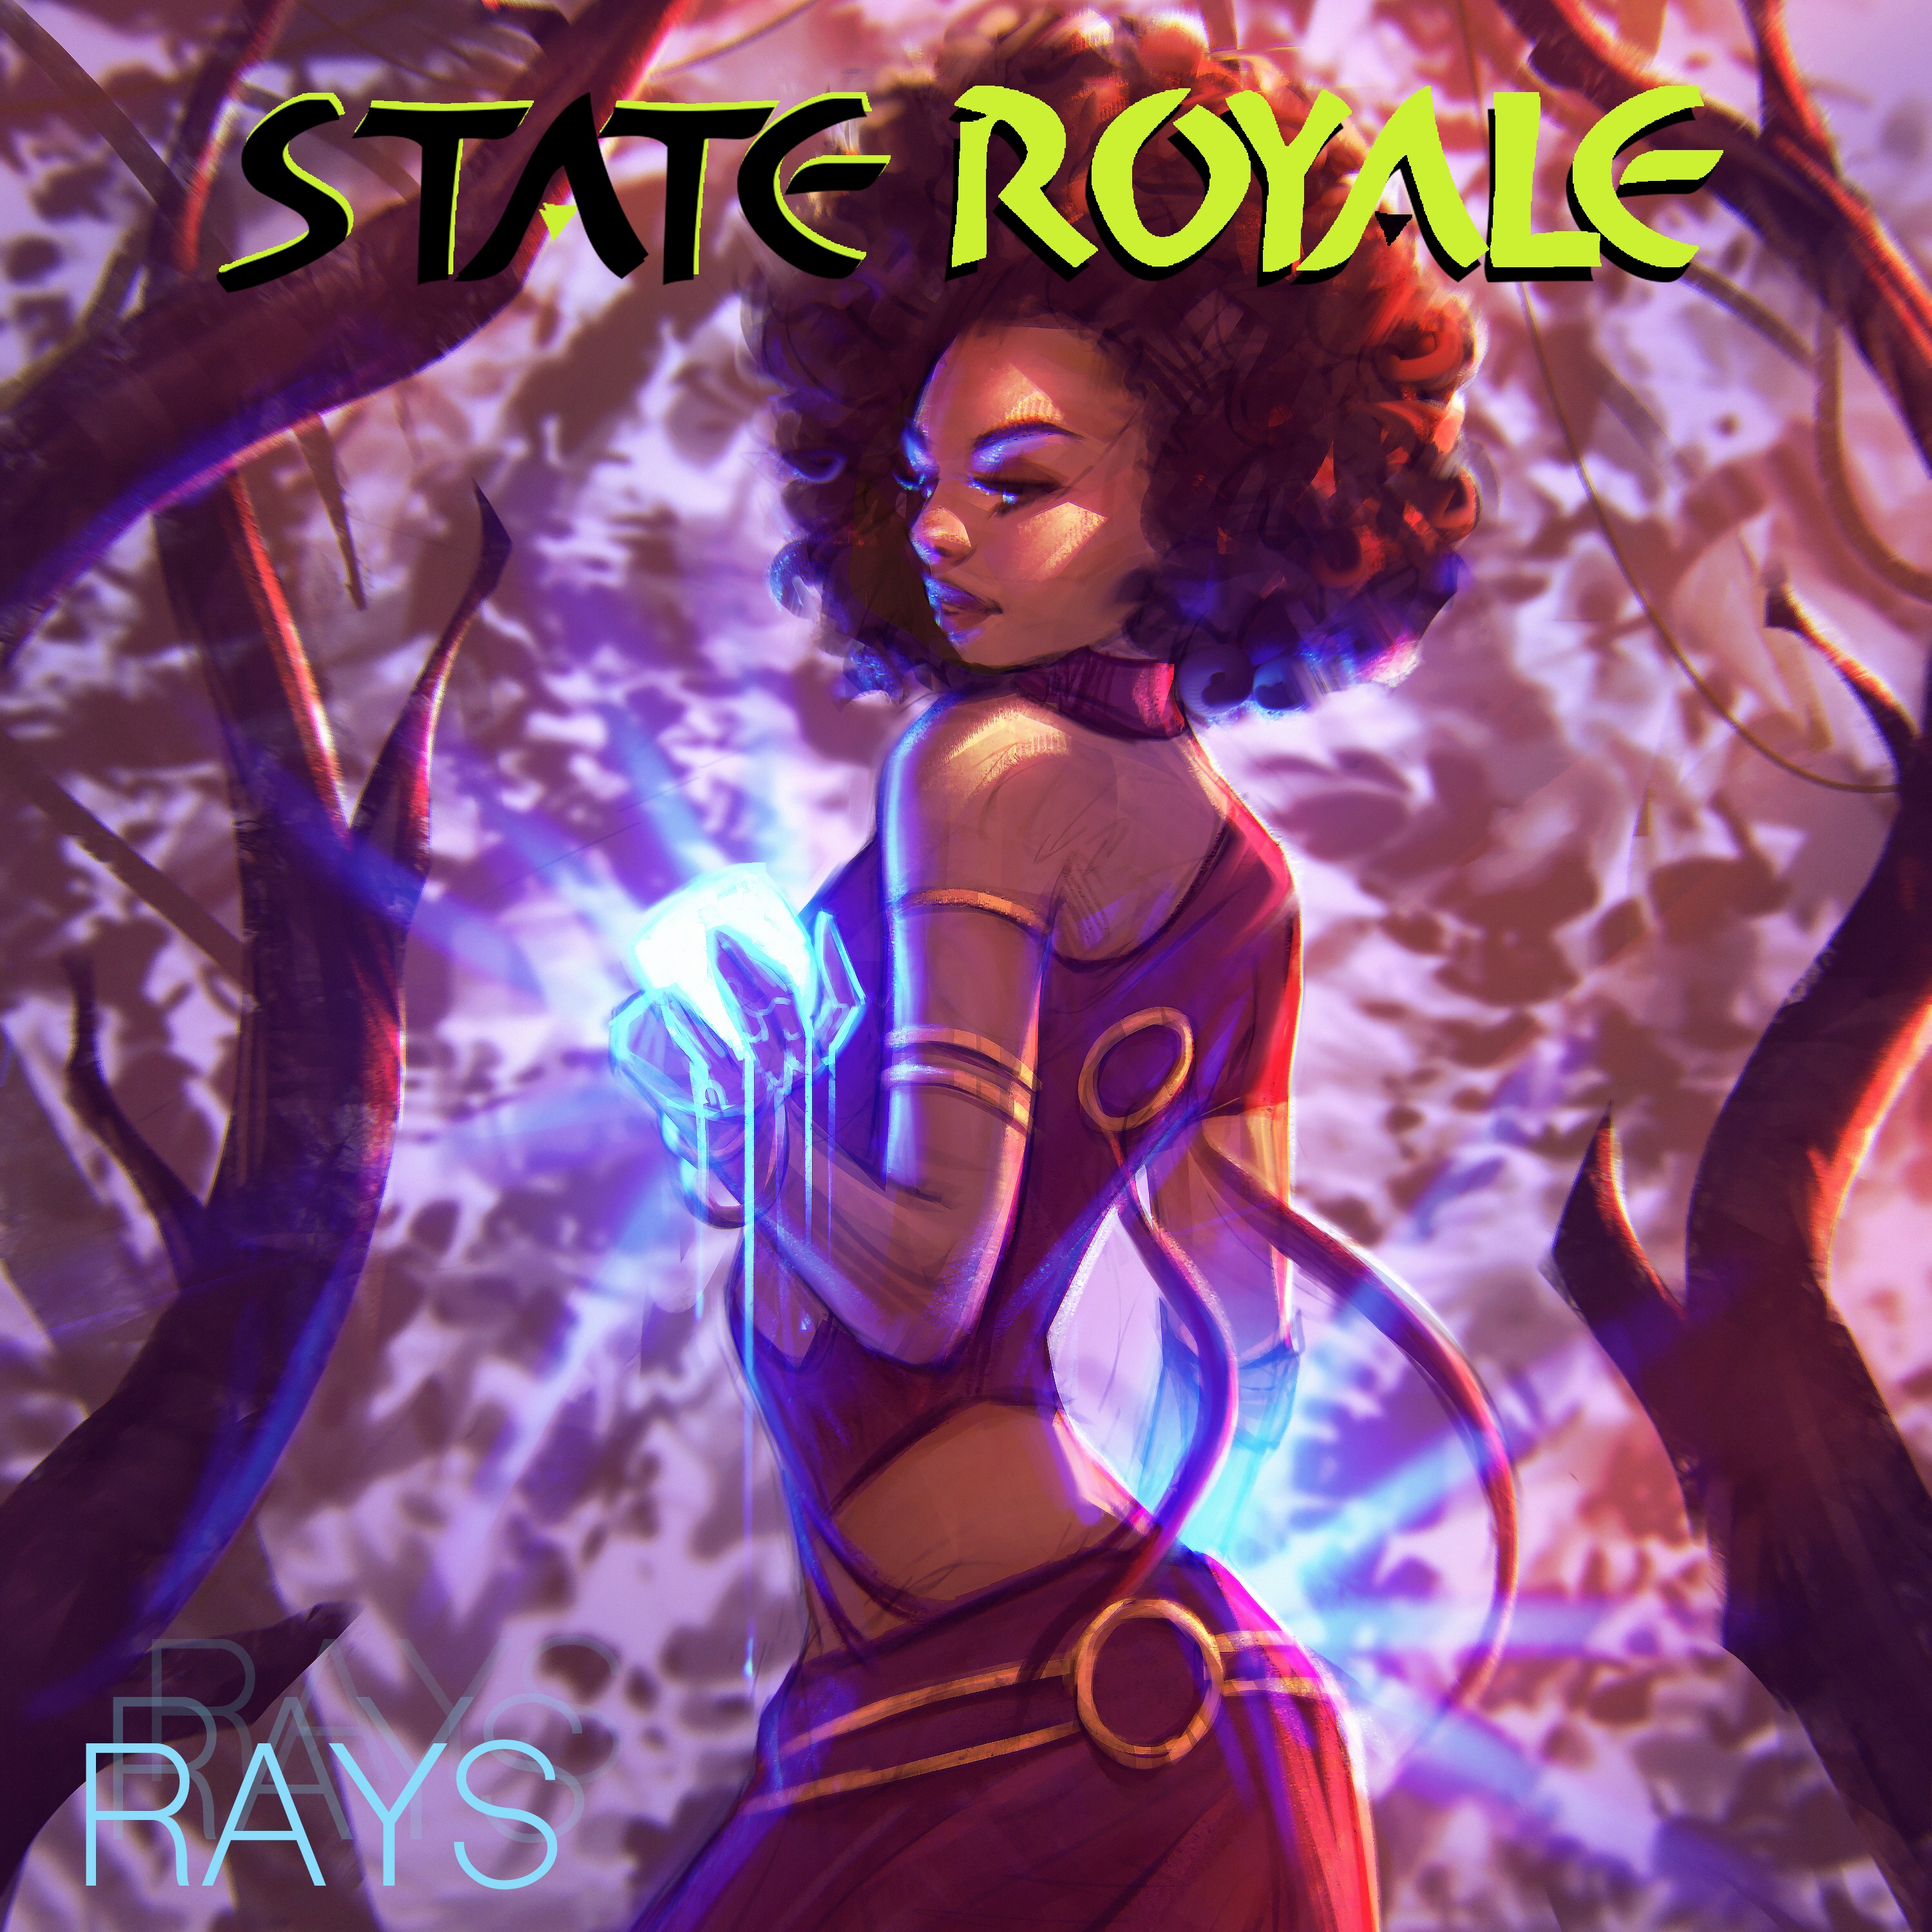 State Royale Gives Us Some Futuristic R&B Vibes In “Rays” (Review & Stream)